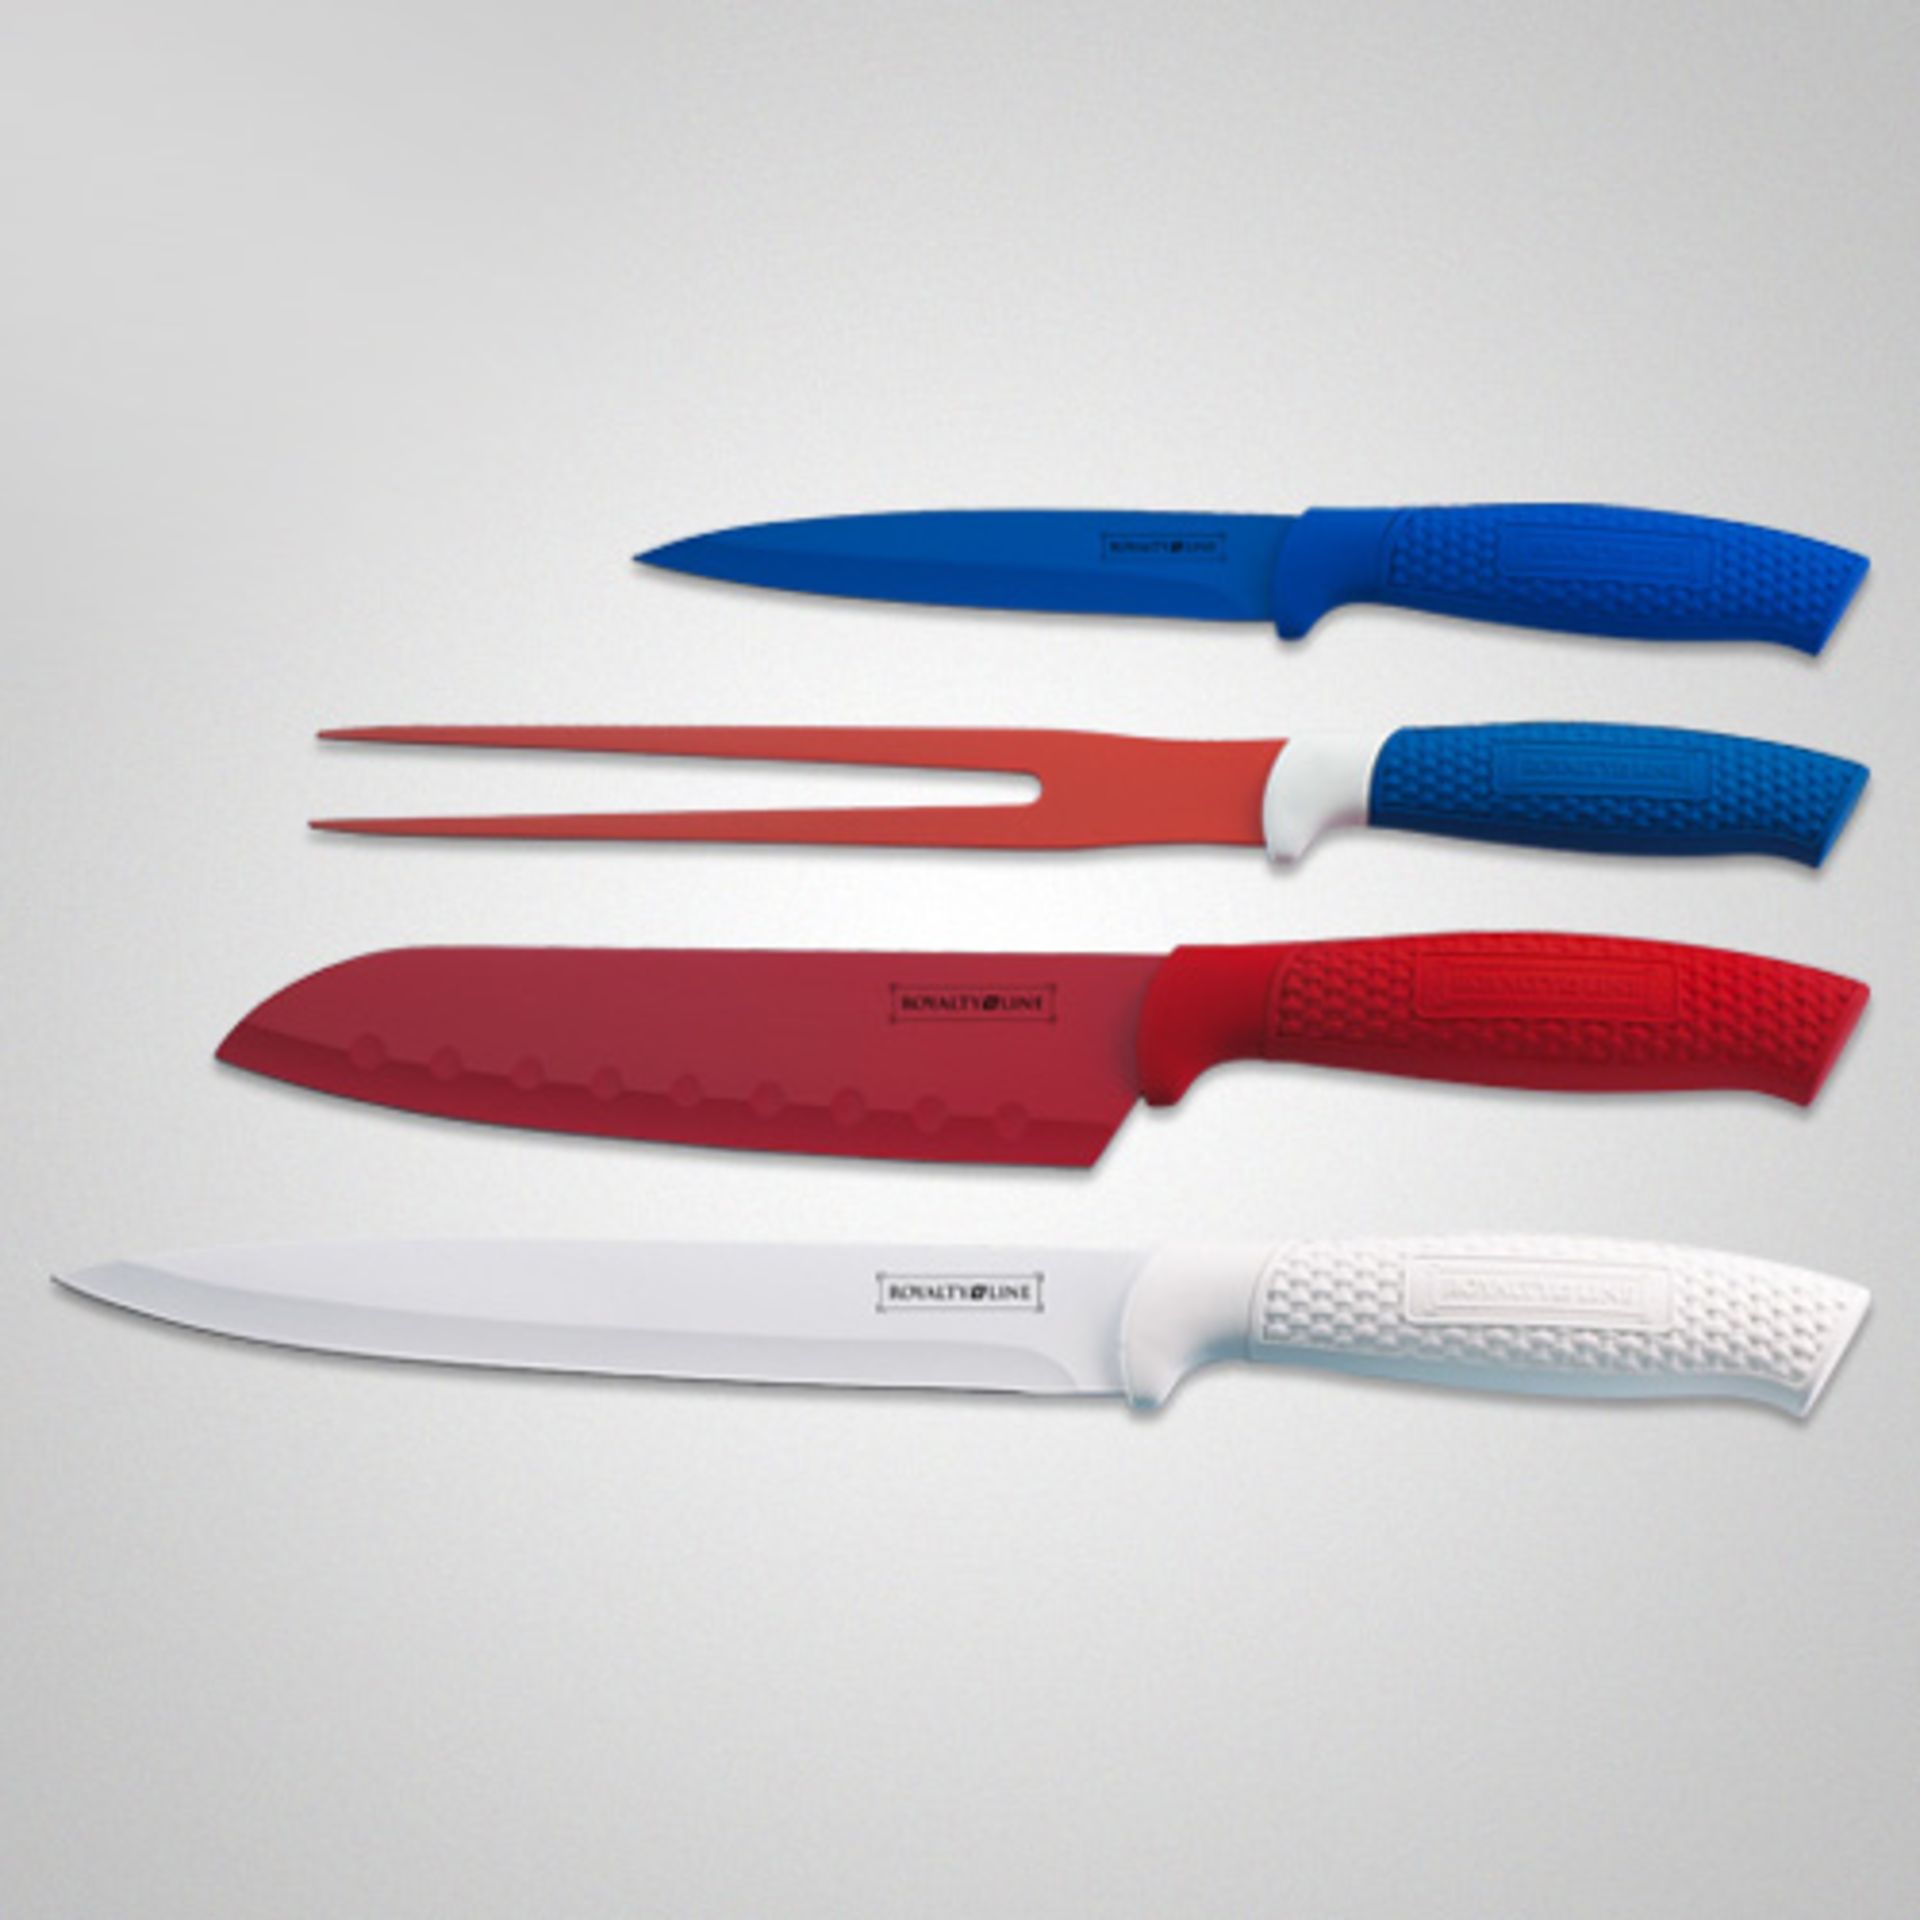 V *TRADE QTY* Brand New Royalty 4 Piece Carving Knife Set In Display Box With Non-Stick Coating X